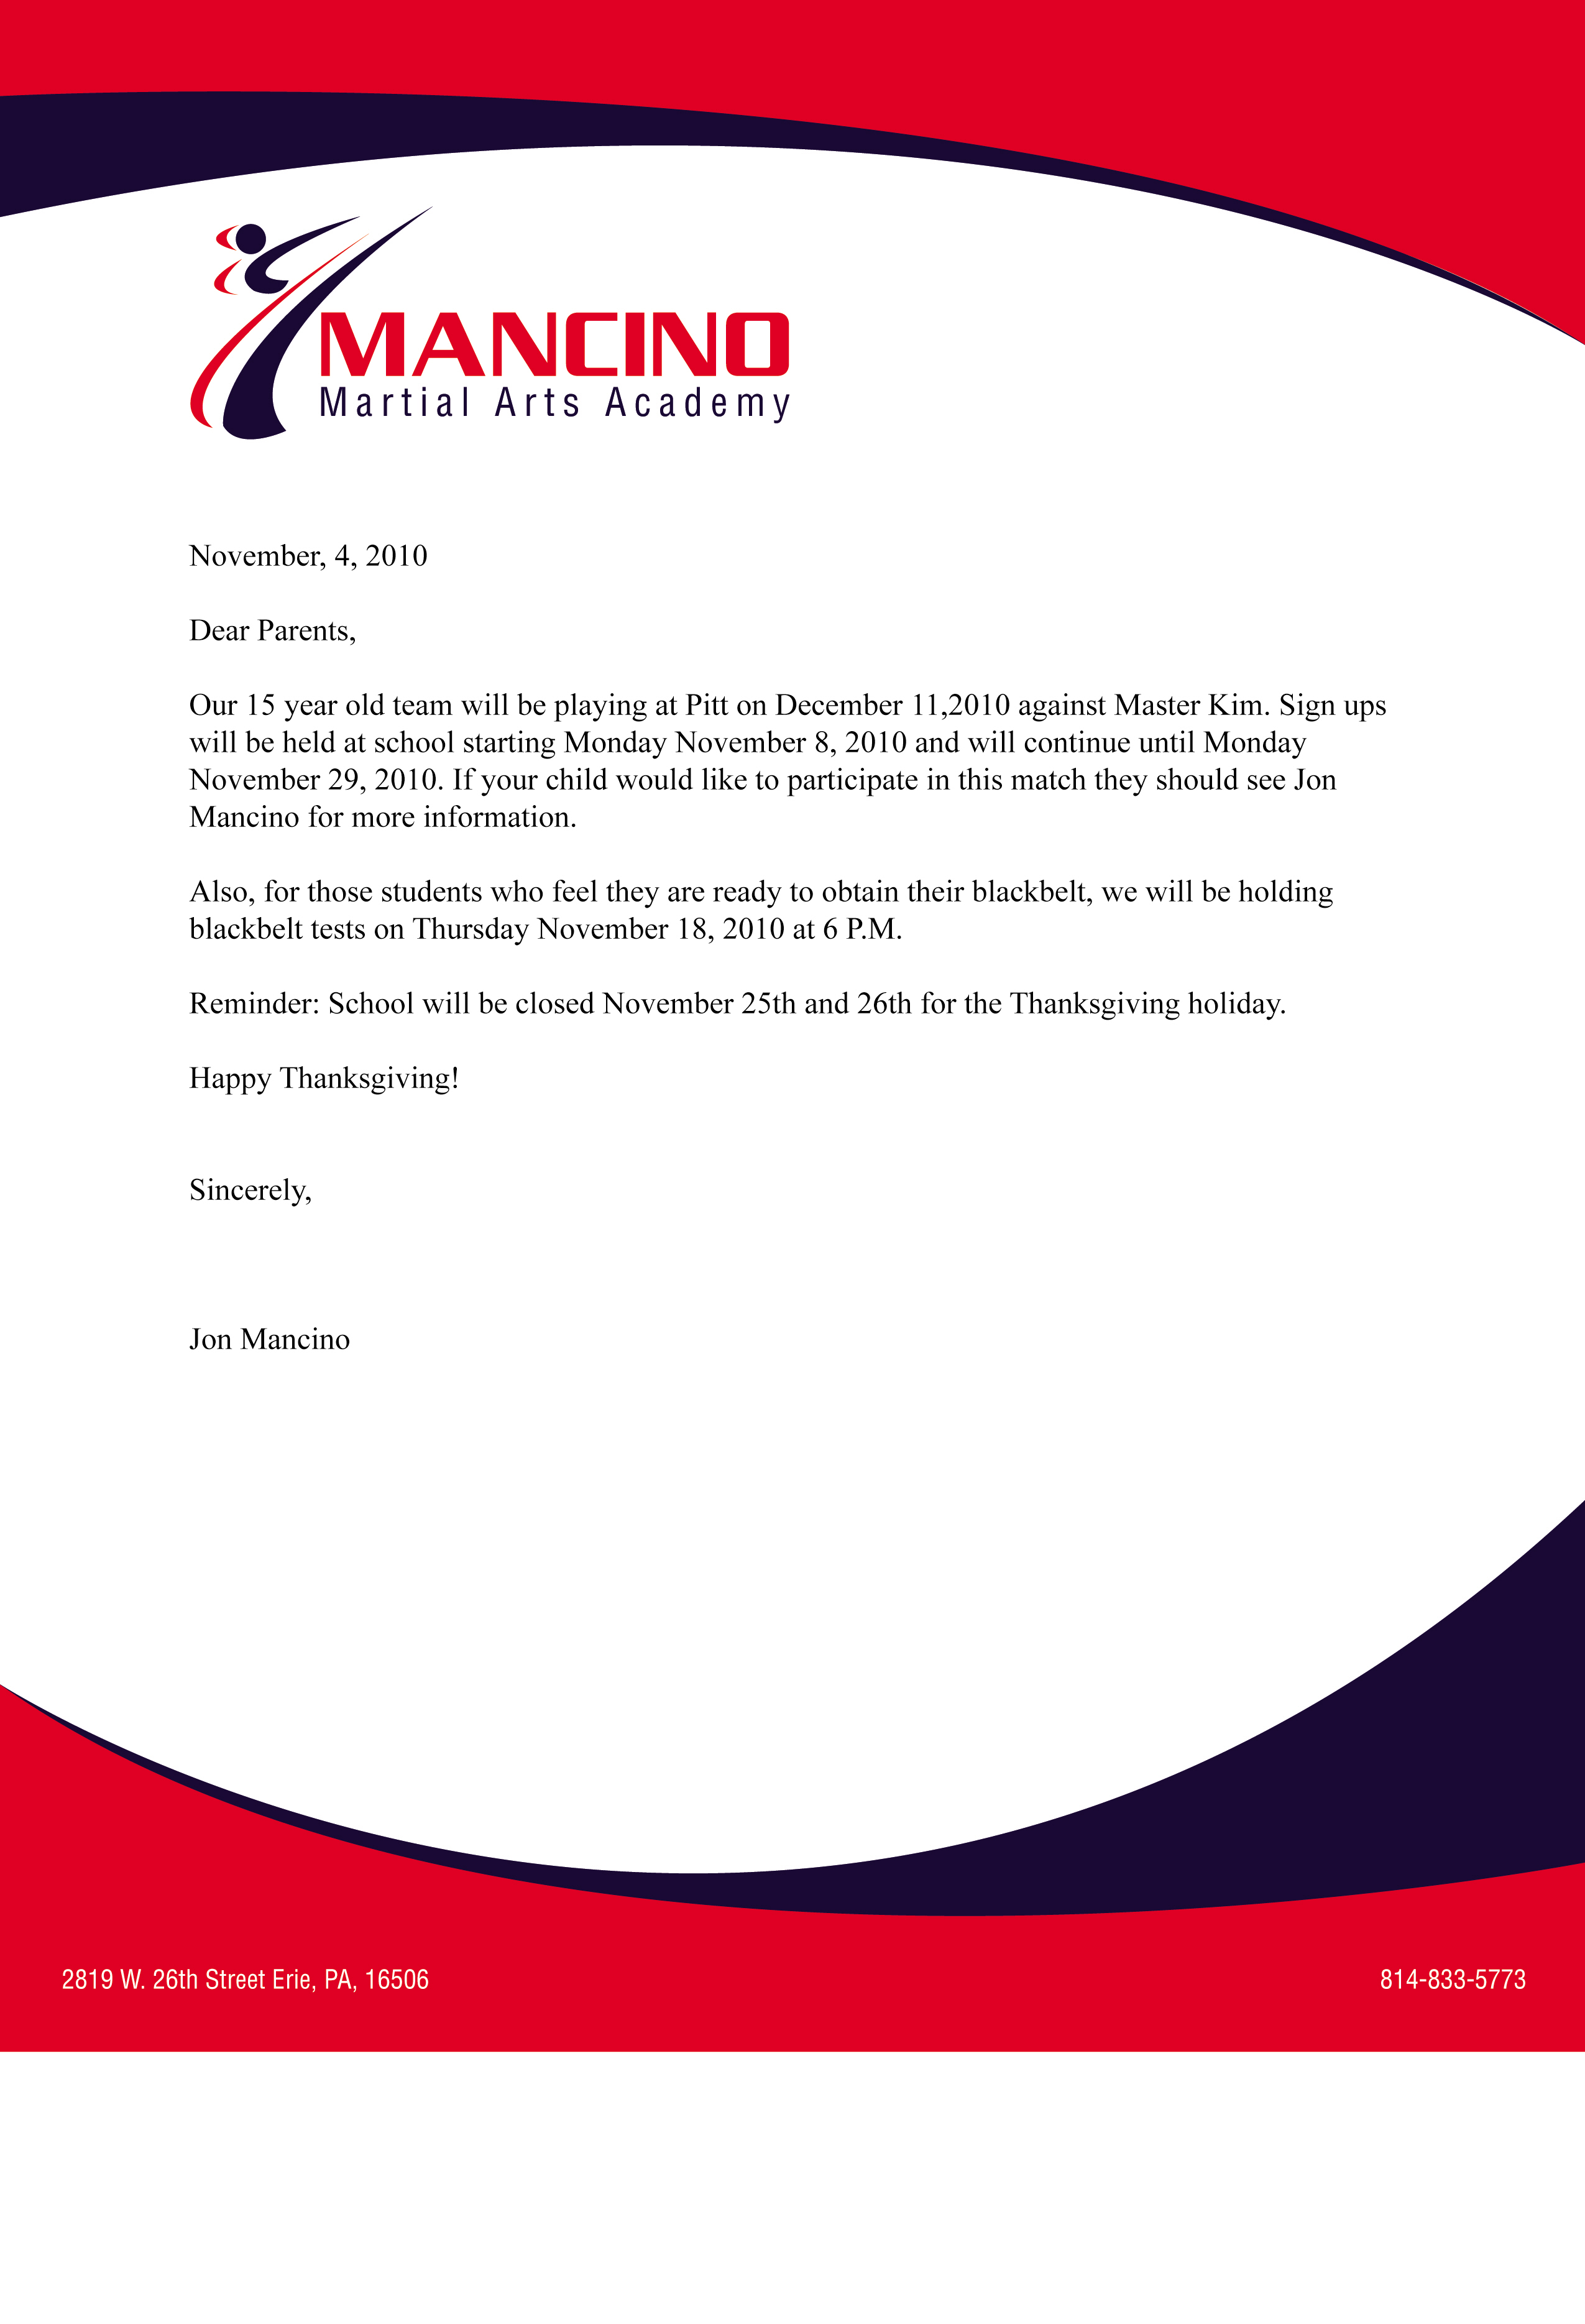 Examples Of Letterheads For Business Letters Scrumps